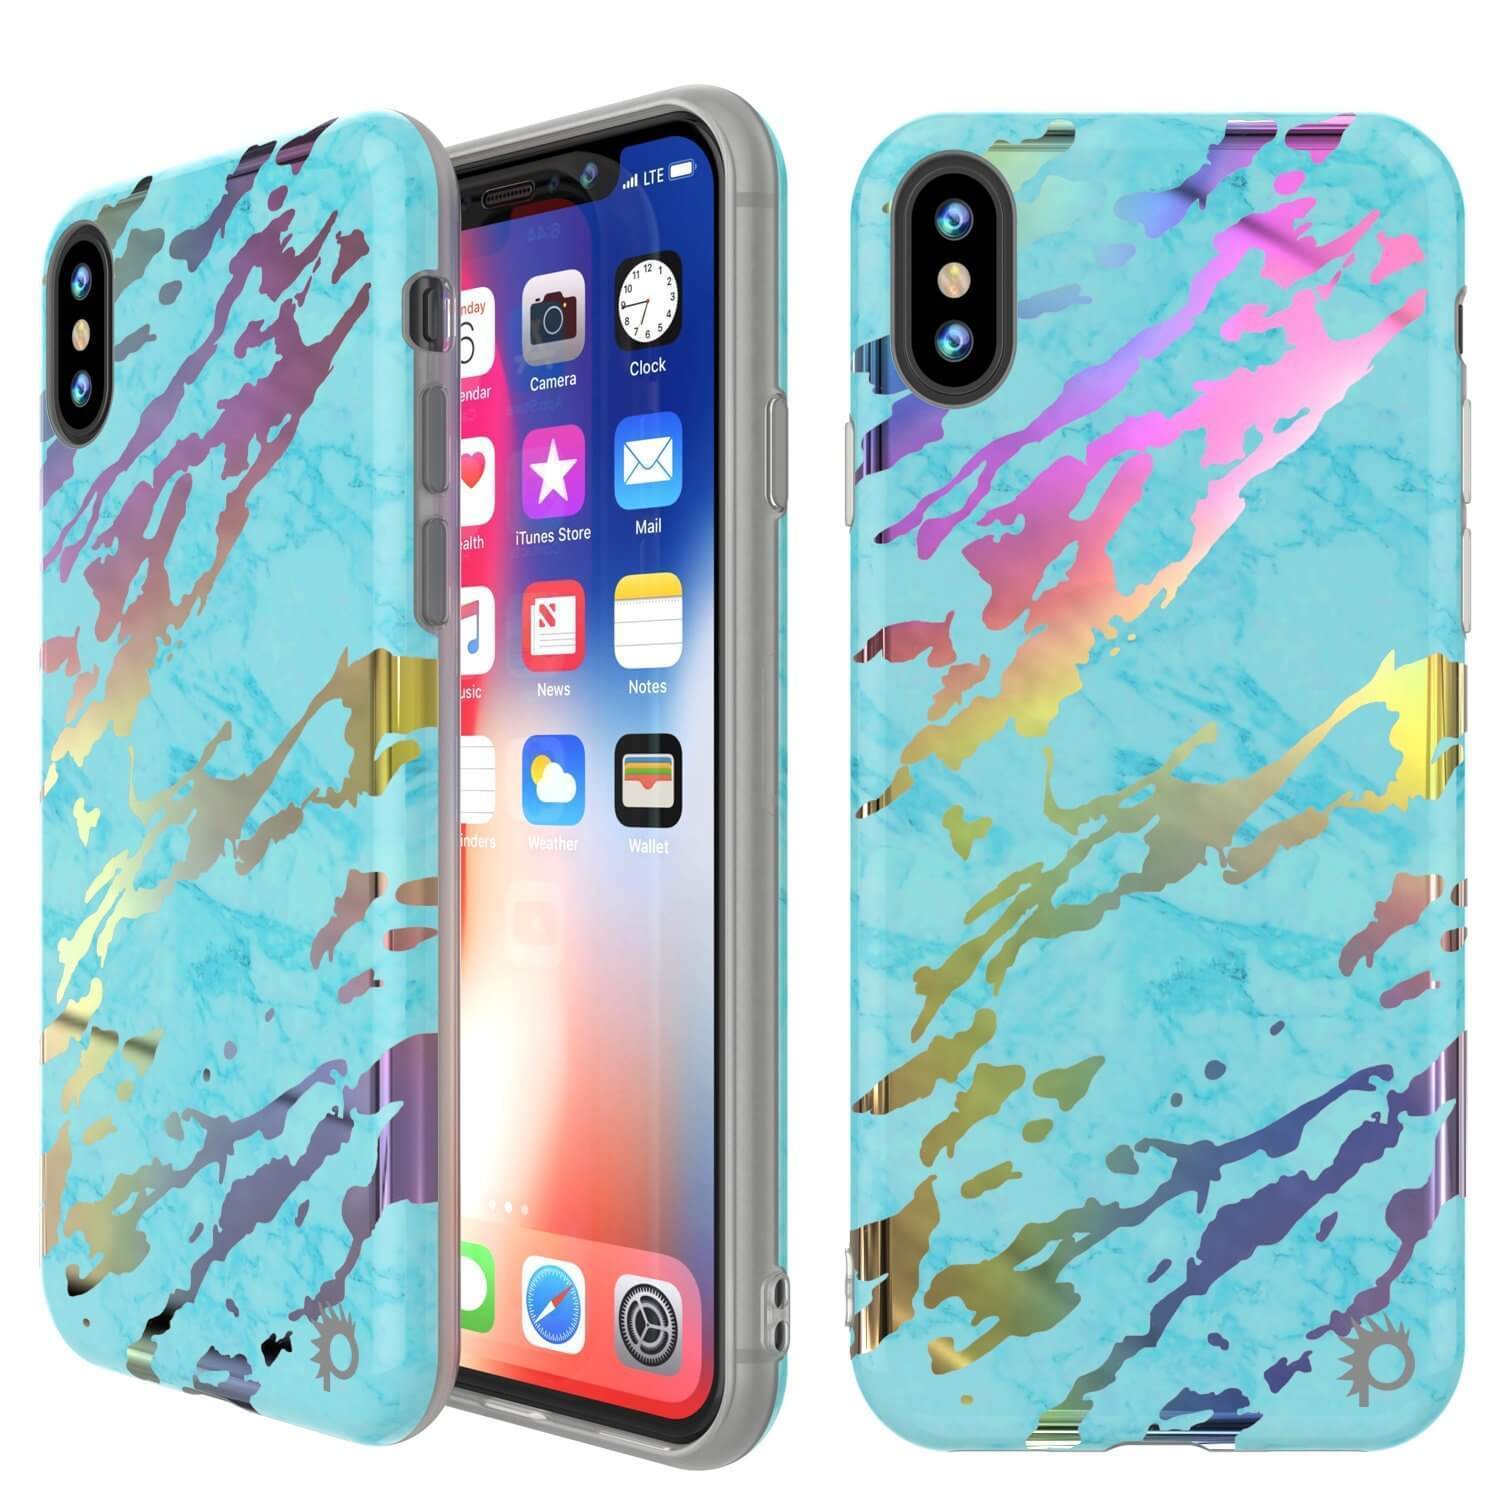 Punkcase iPhone XS Max Marble Case, Protective Full Body Cover W/9H Tempered Glass Screen Protector (Teal Onyx)